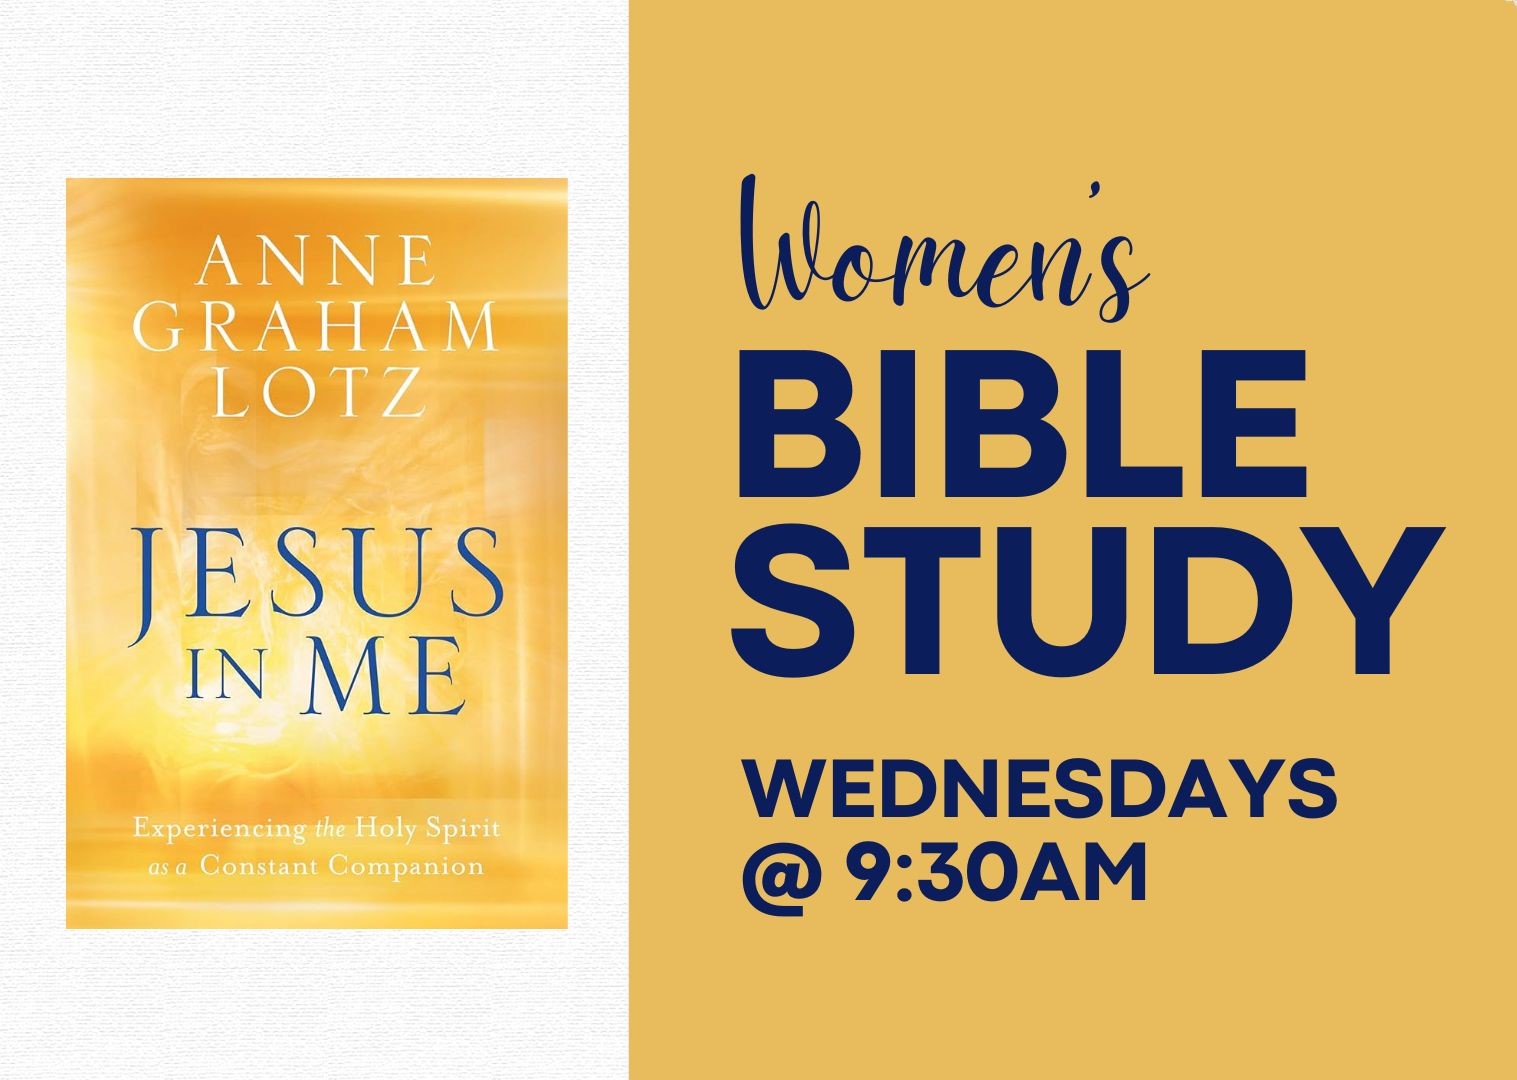 womensbiblestudy_events image